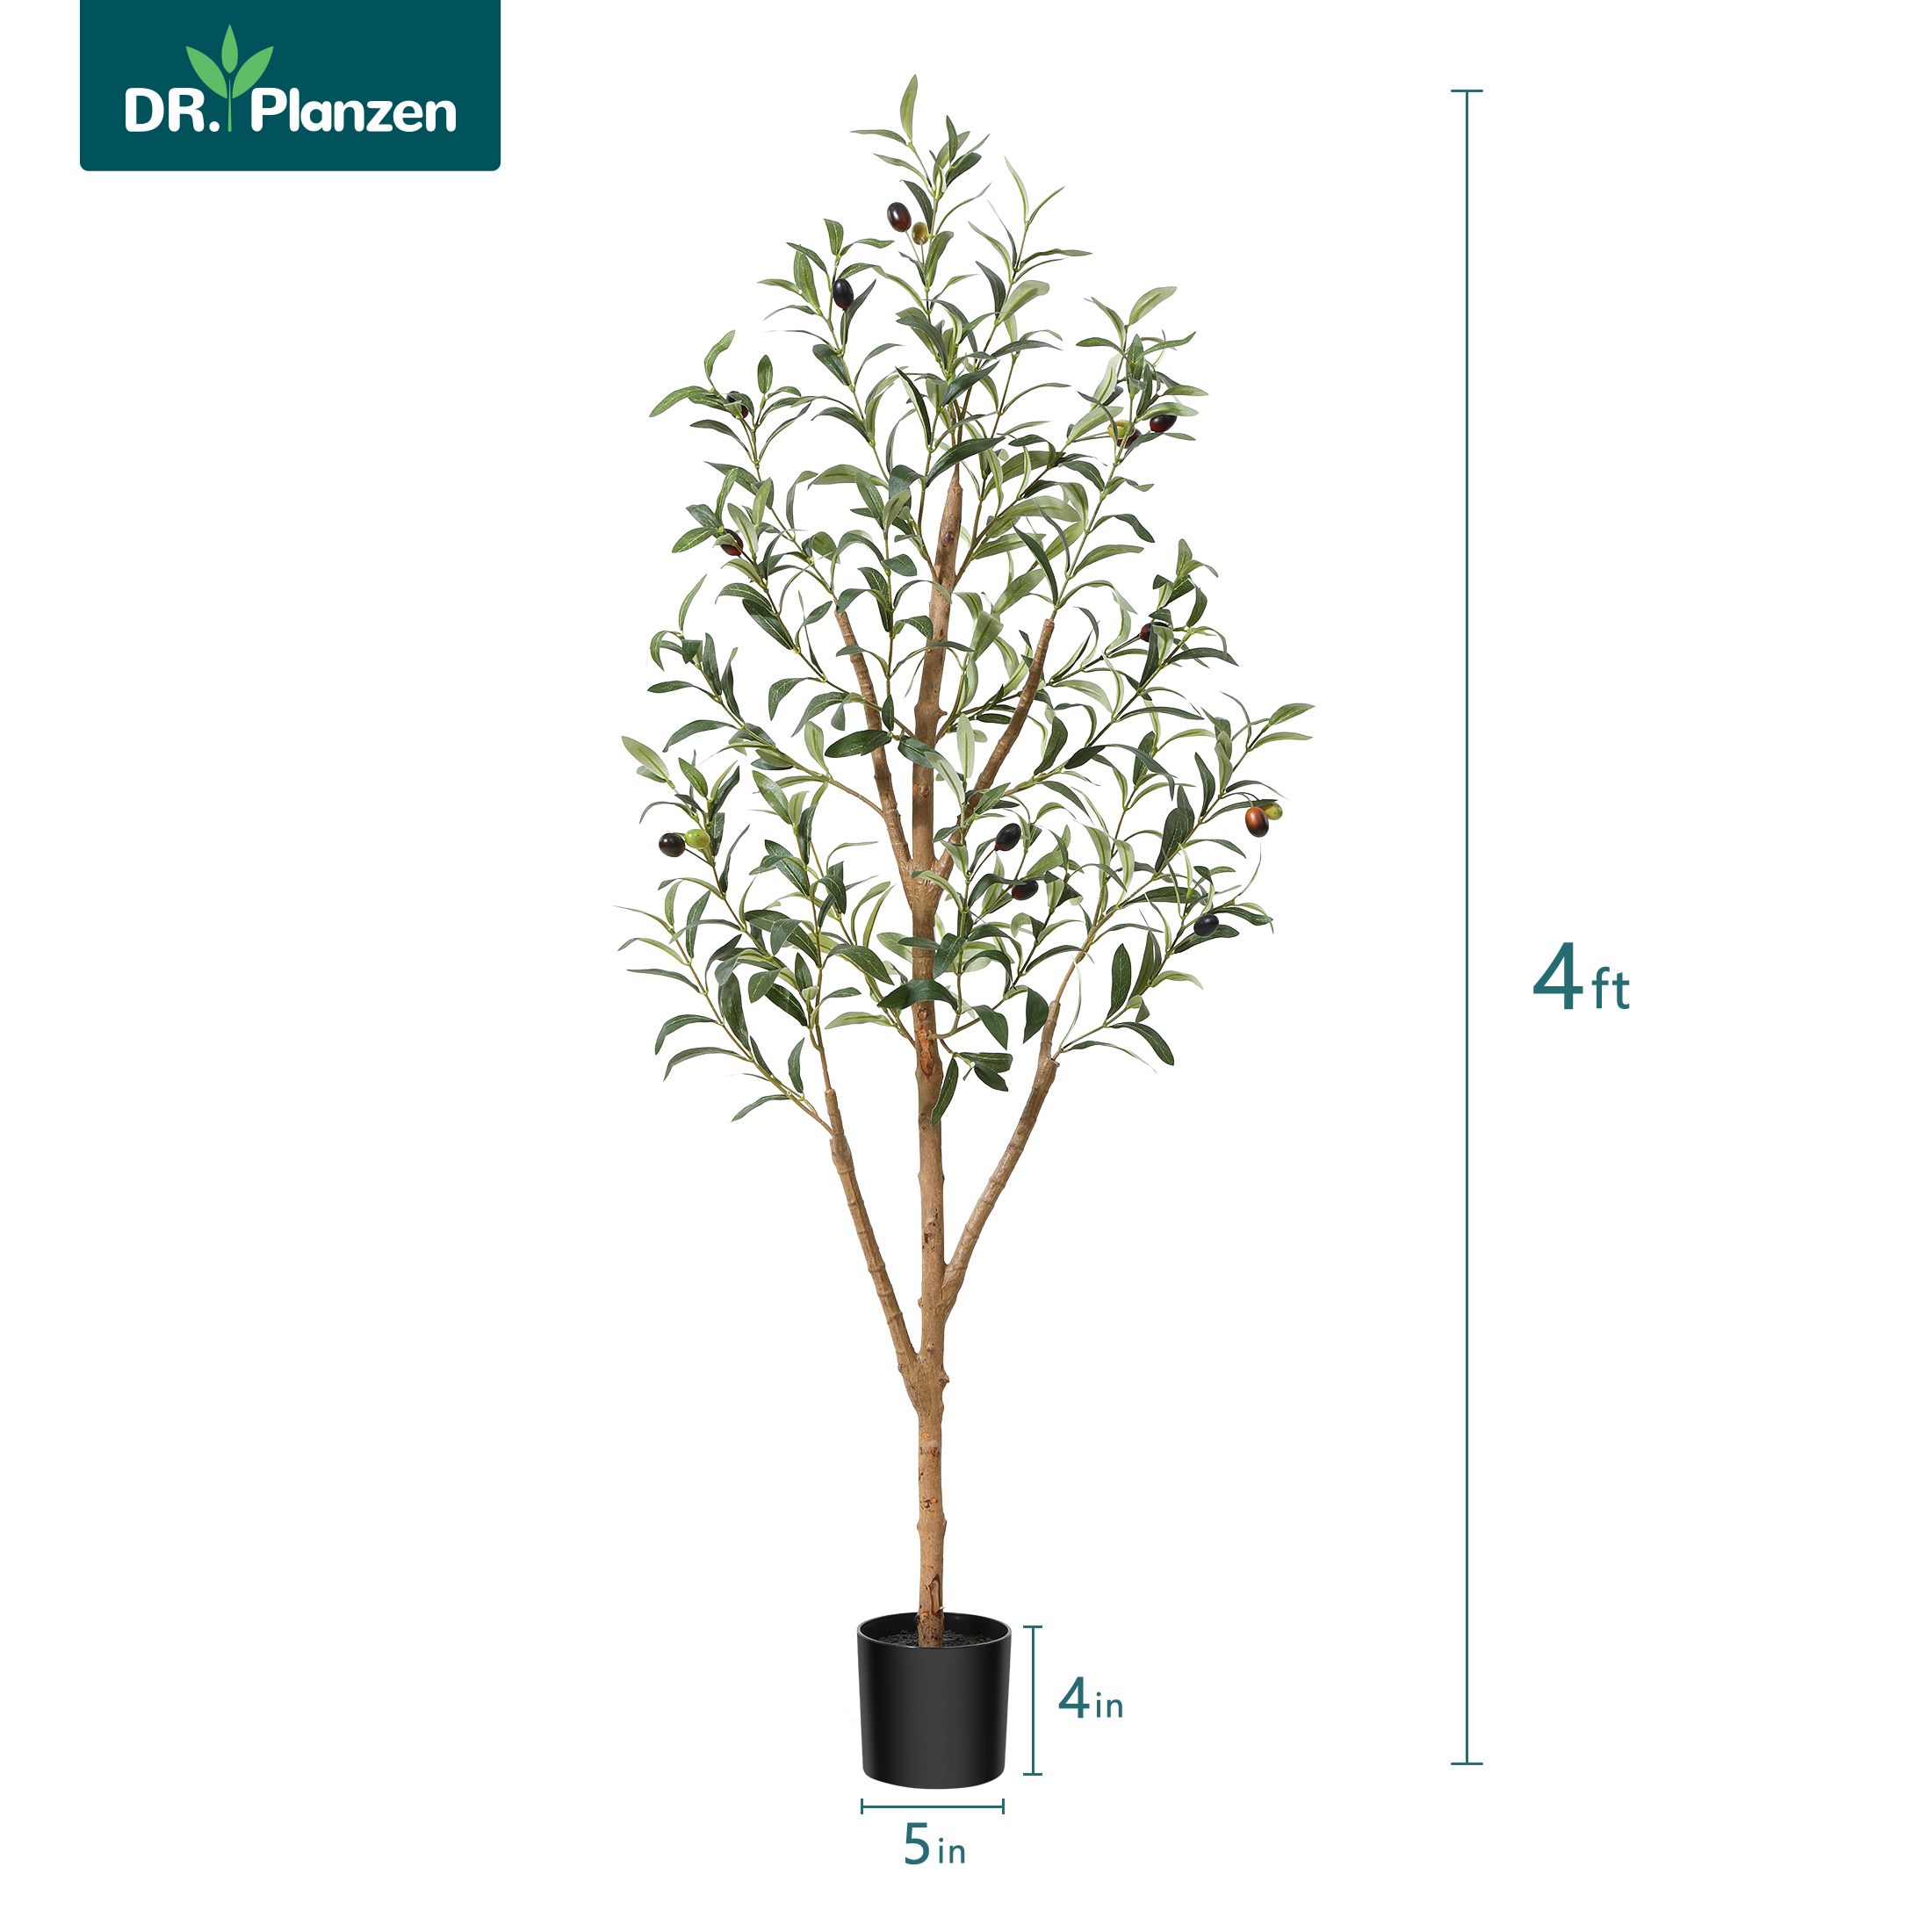 4 ft Artificial Olive Plants with Realistic Leaves and Natural Trunk, Silk Fake Potted Tree with Wood Branches and Fruits, Faux Olive Tree for Office Home - image 3 of 8